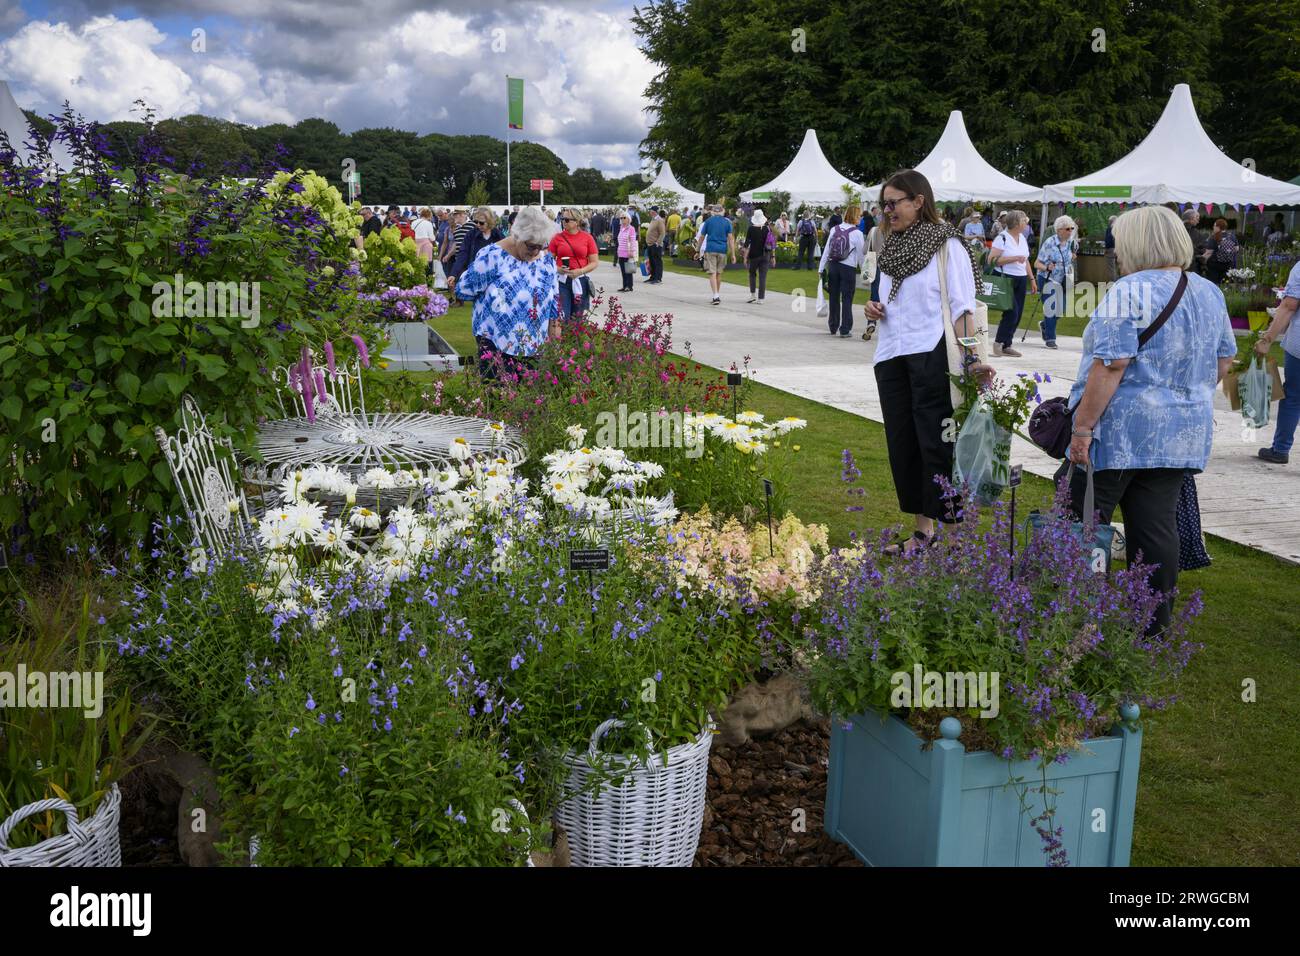 Visitors & trade stands (people view showground exhibitor's display, patio furniture seating) - RHS Flower Show Tatton Park 2023, Cheshire England UK. Stock Photo